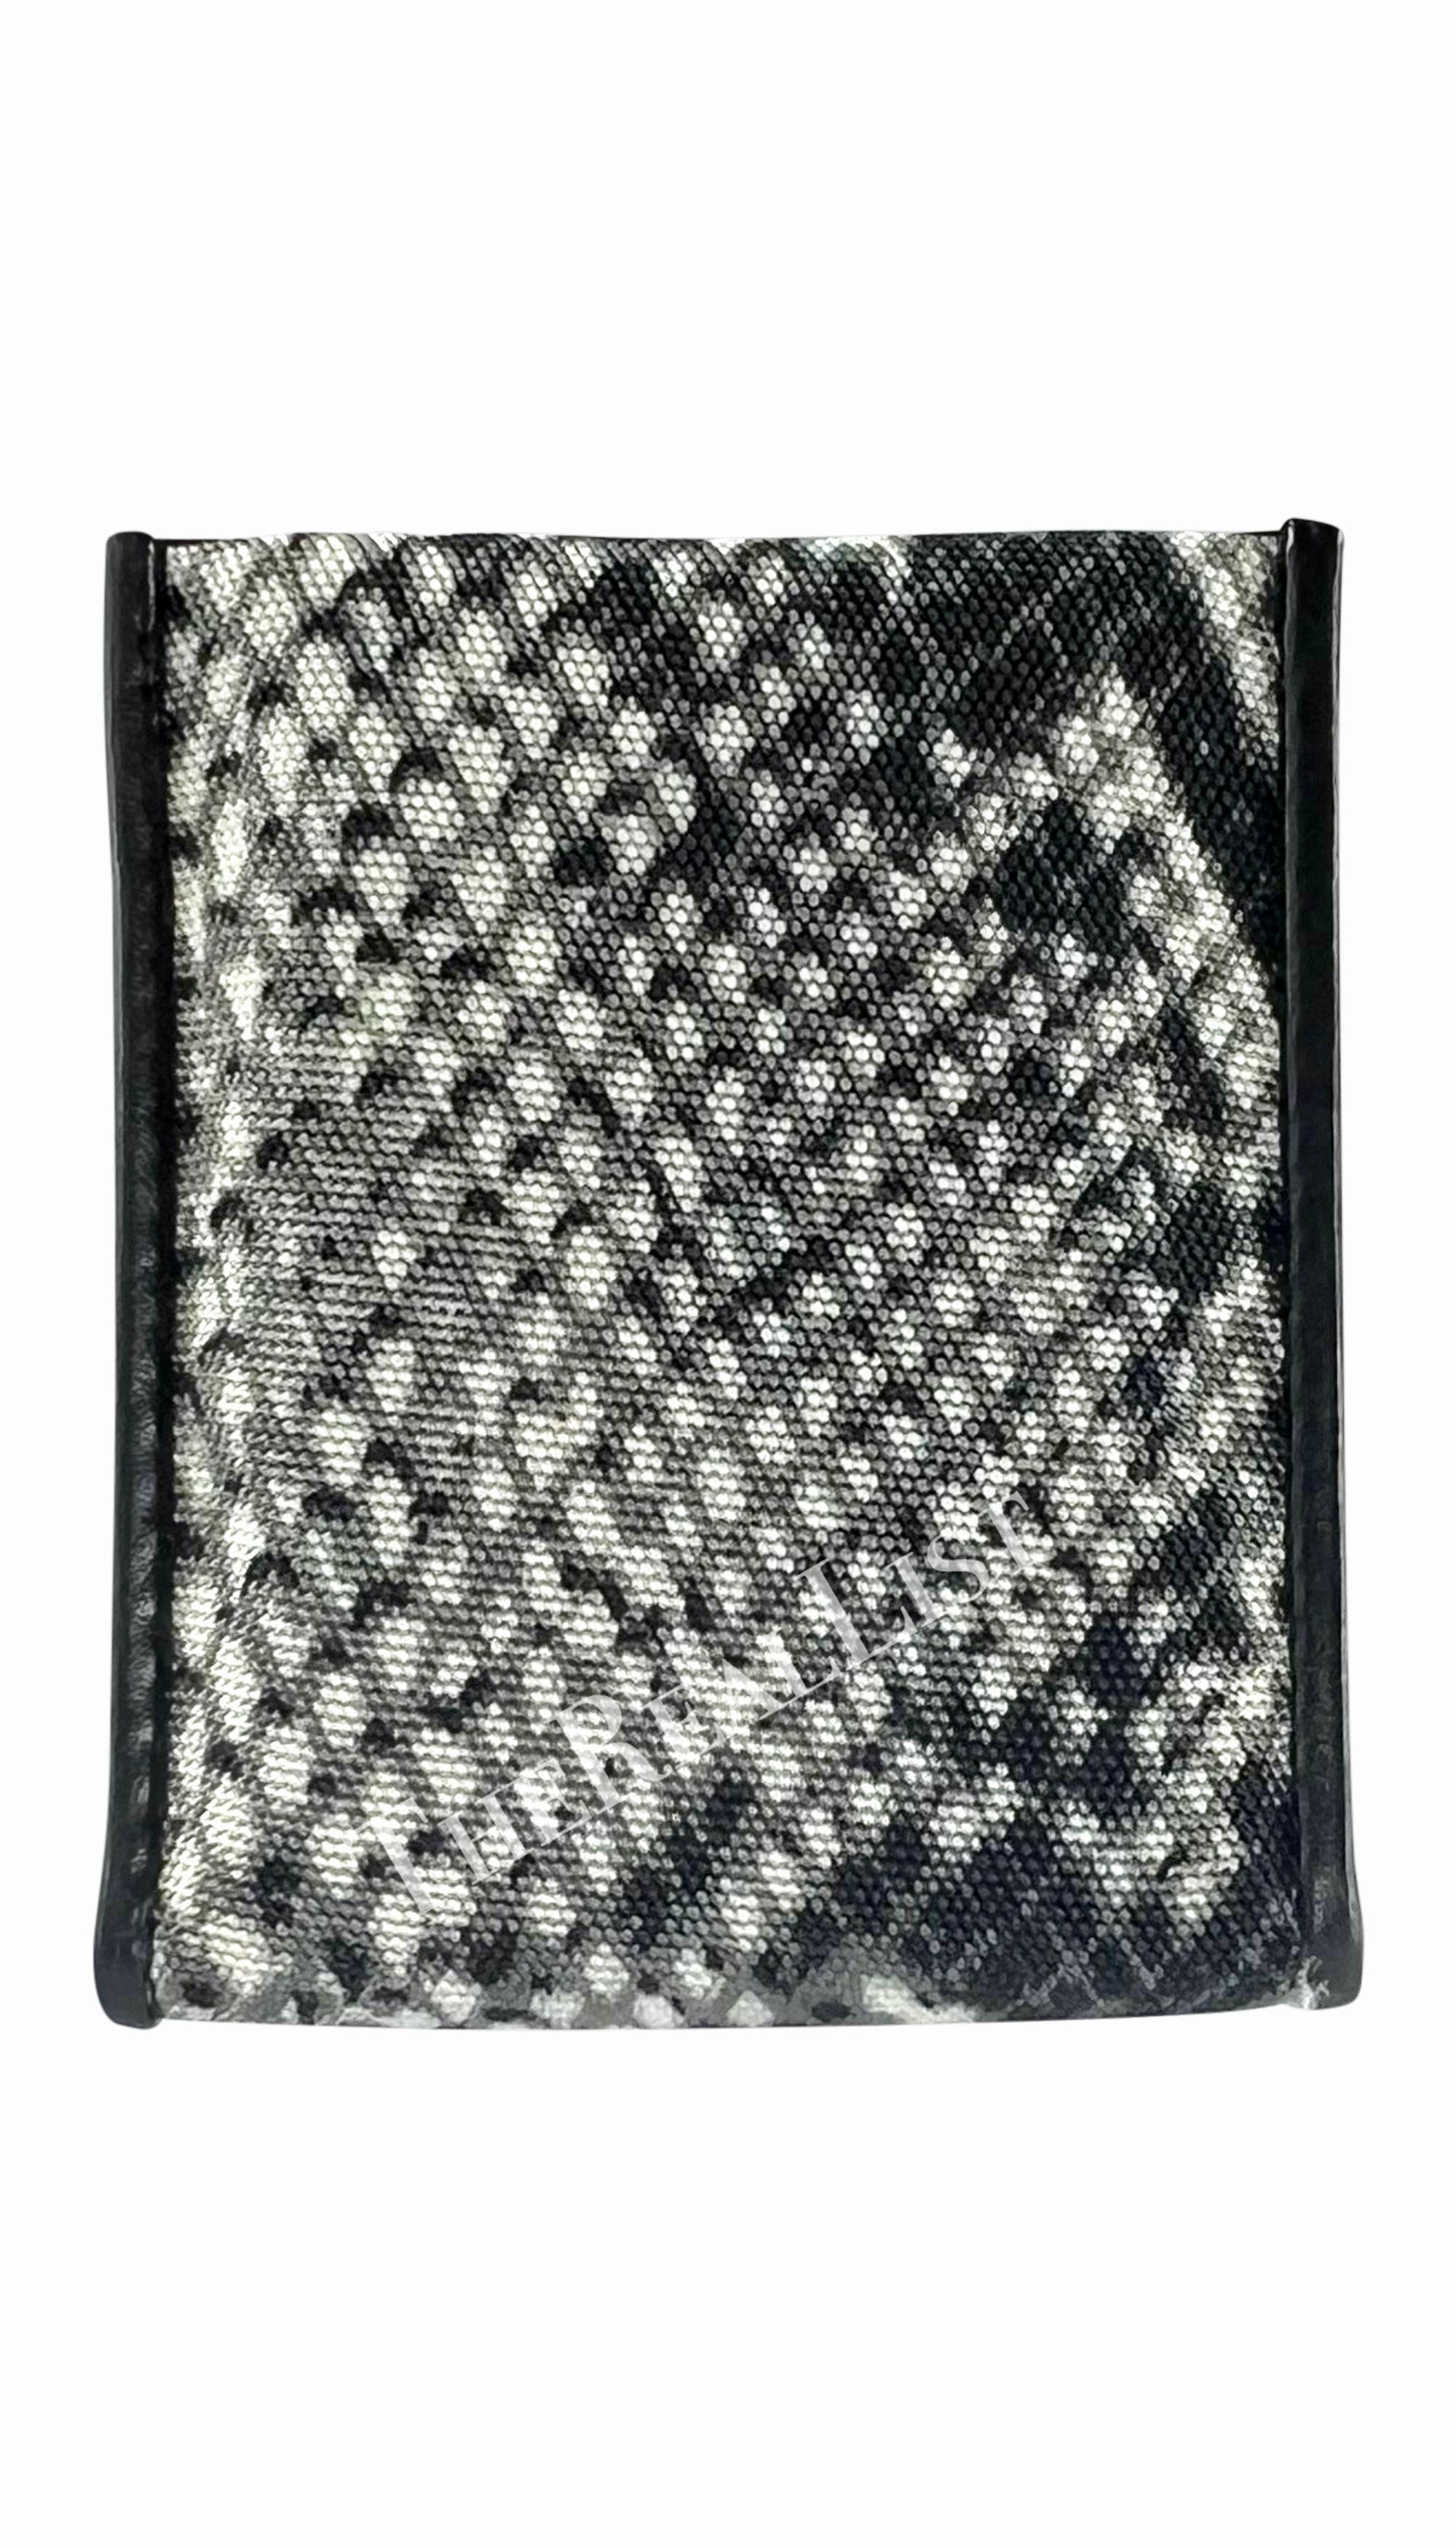 S/S 2000 Gucci by Tom Ford Grey Snake Print Condom Holder In Good Condition For Sale In West Hollywood, CA